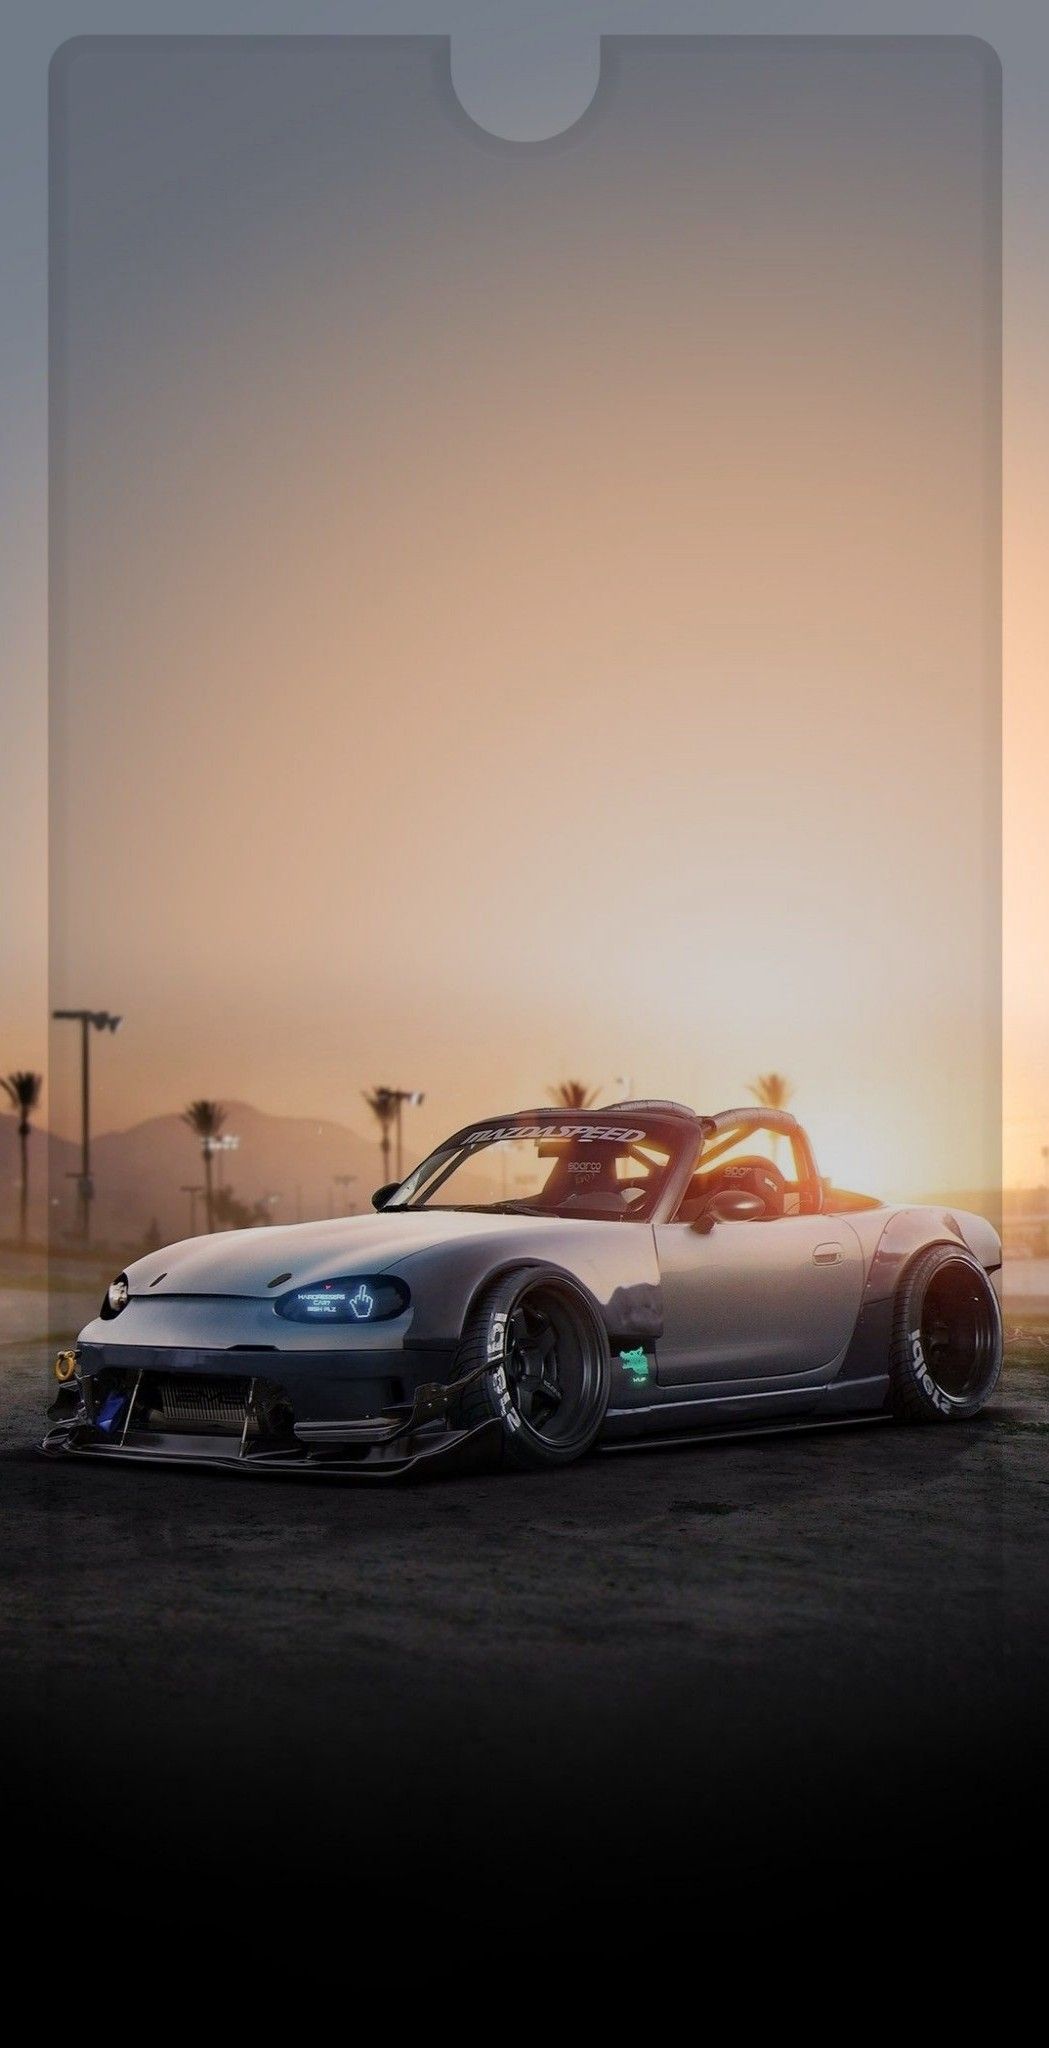 Iphone Modified Cars Wallpapers Iphone - HD Wallpaper 